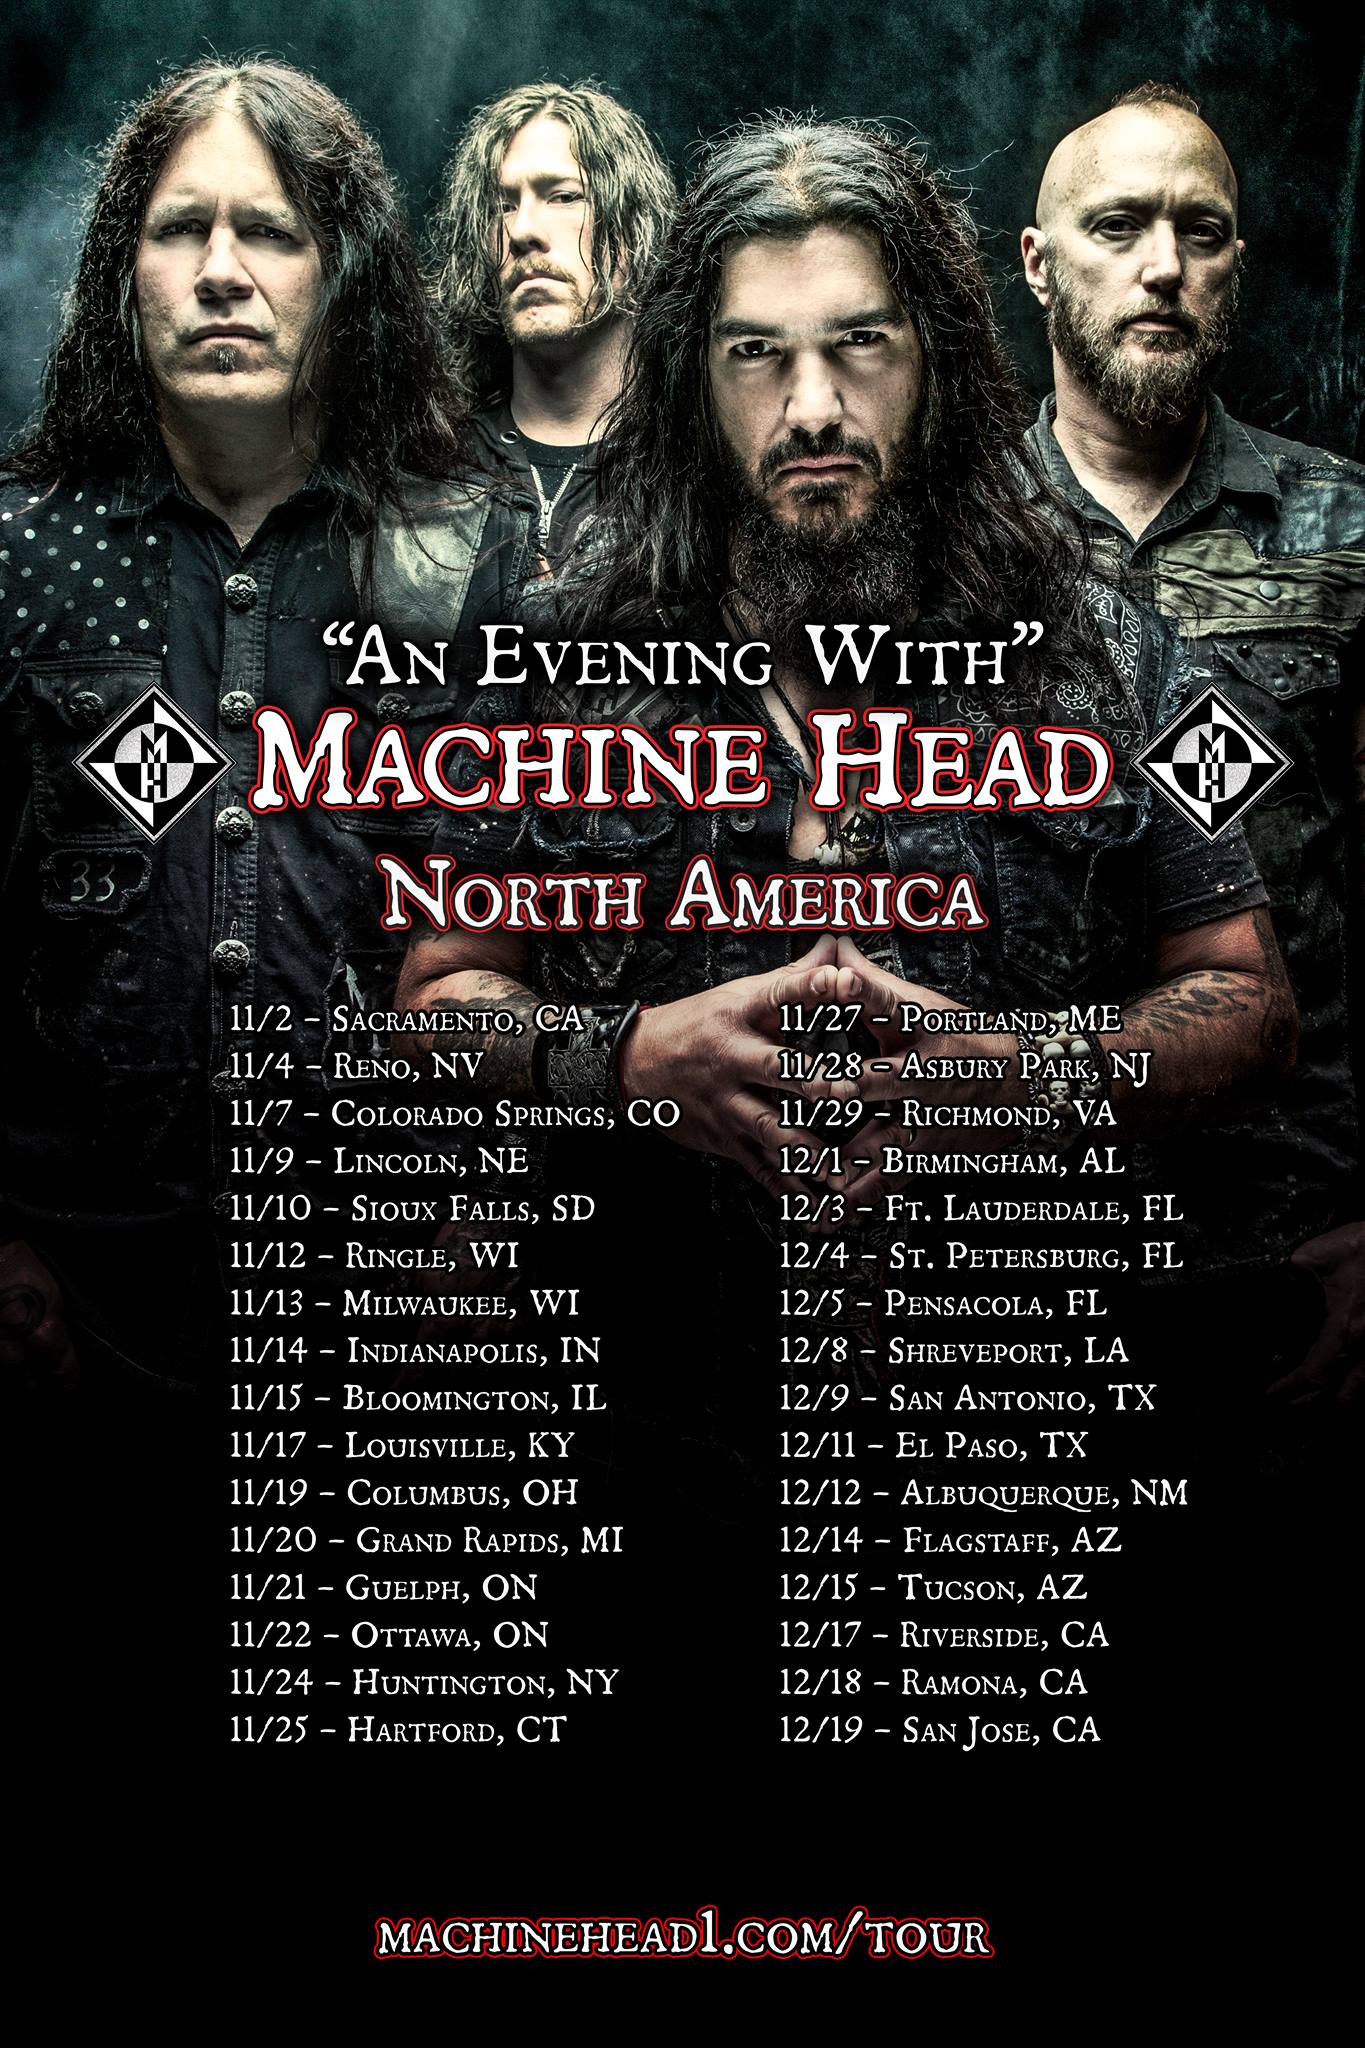 MACHINE HEAD IS TOURING THIS NOVEMBER/DECEMBER!